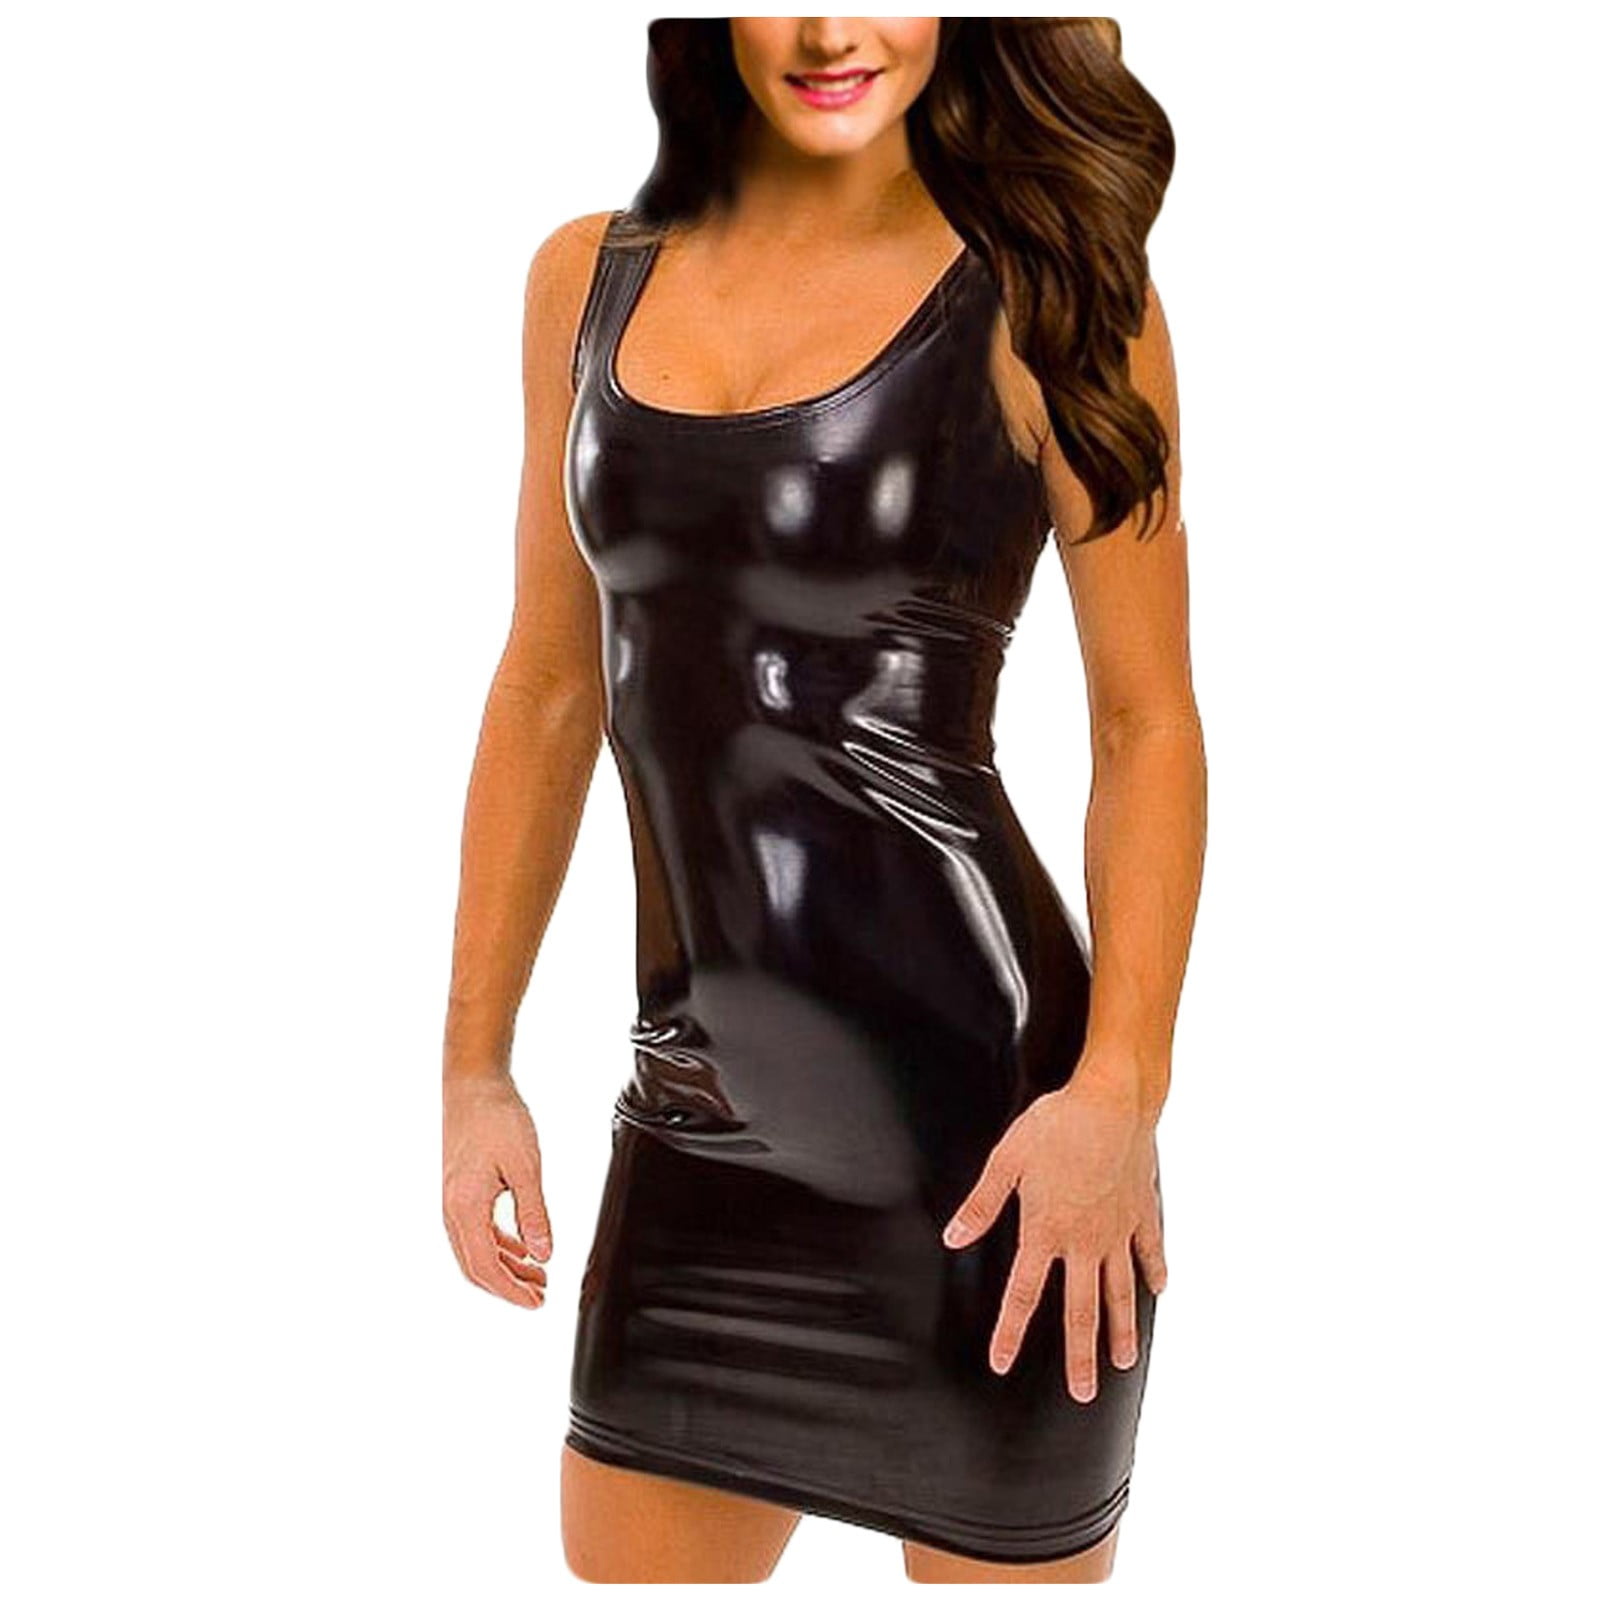 Girls In Leather Dress